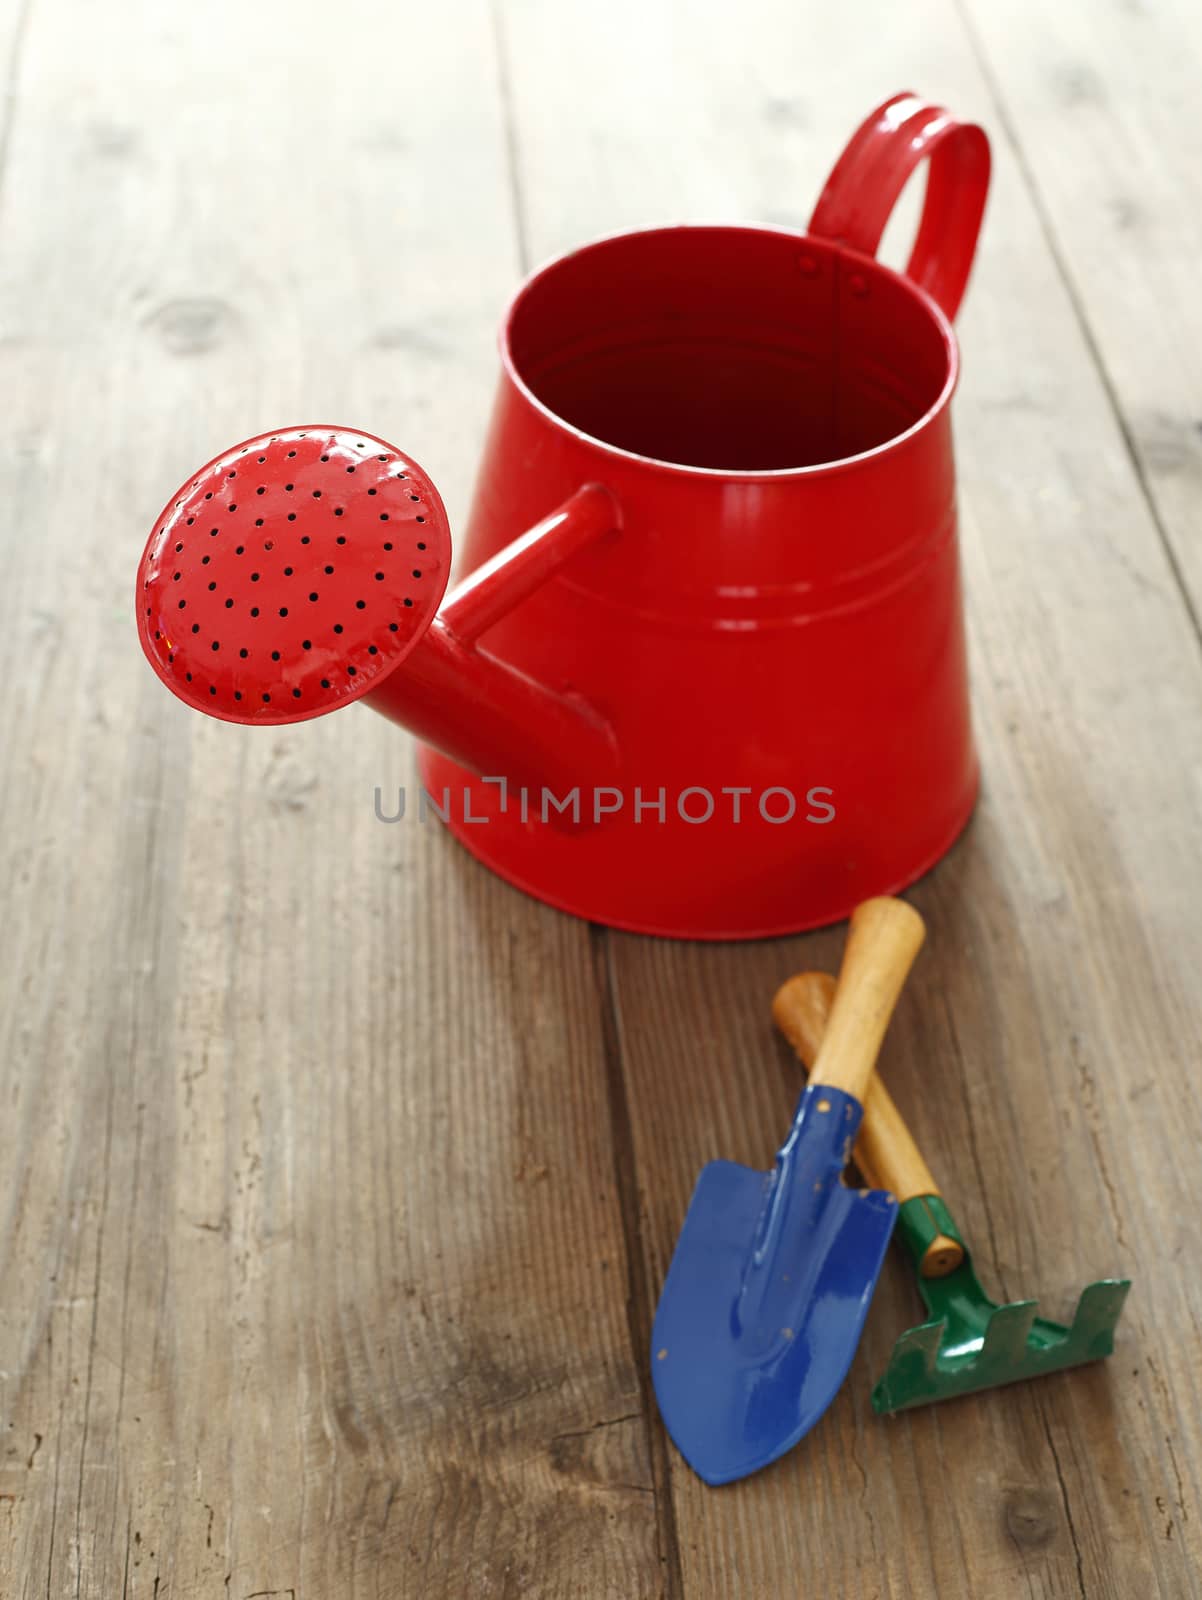  water can and garden tools on a wooden background